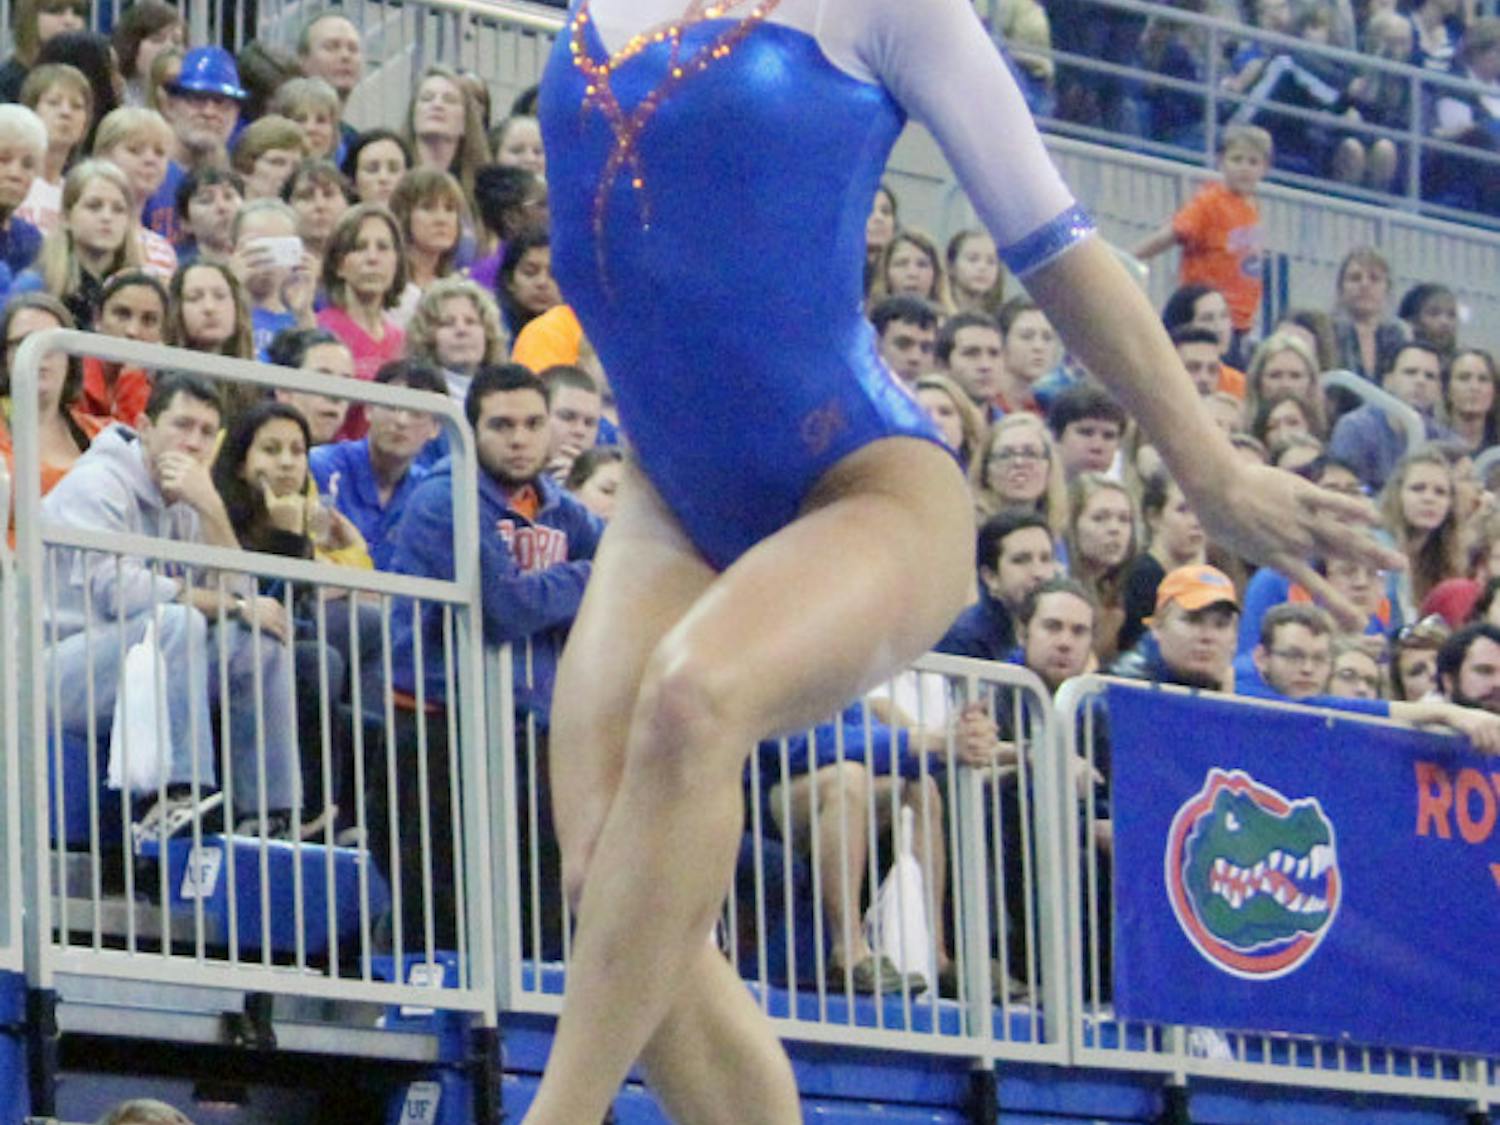 Alaina Johnson performs a beam routine during Florida’s win against Oklahoma on Jan. 31 in the O’Connell Center.